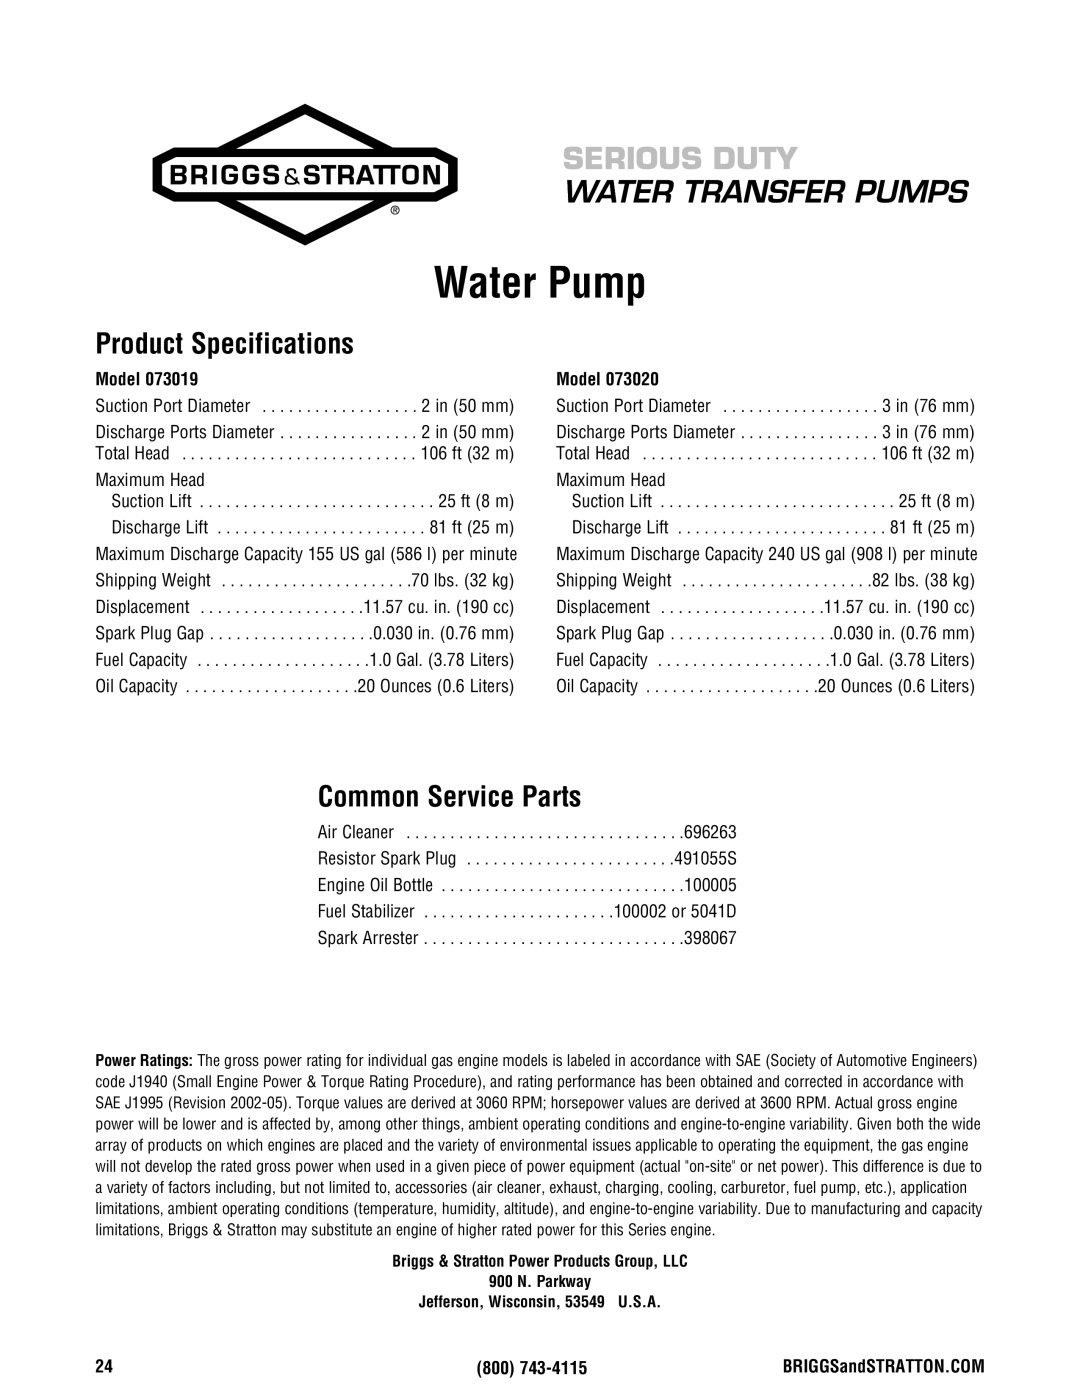 Briggs & Stratton Water Transfer Pump manual Water Pump, Product Specifications, Common Service Parts, Model 